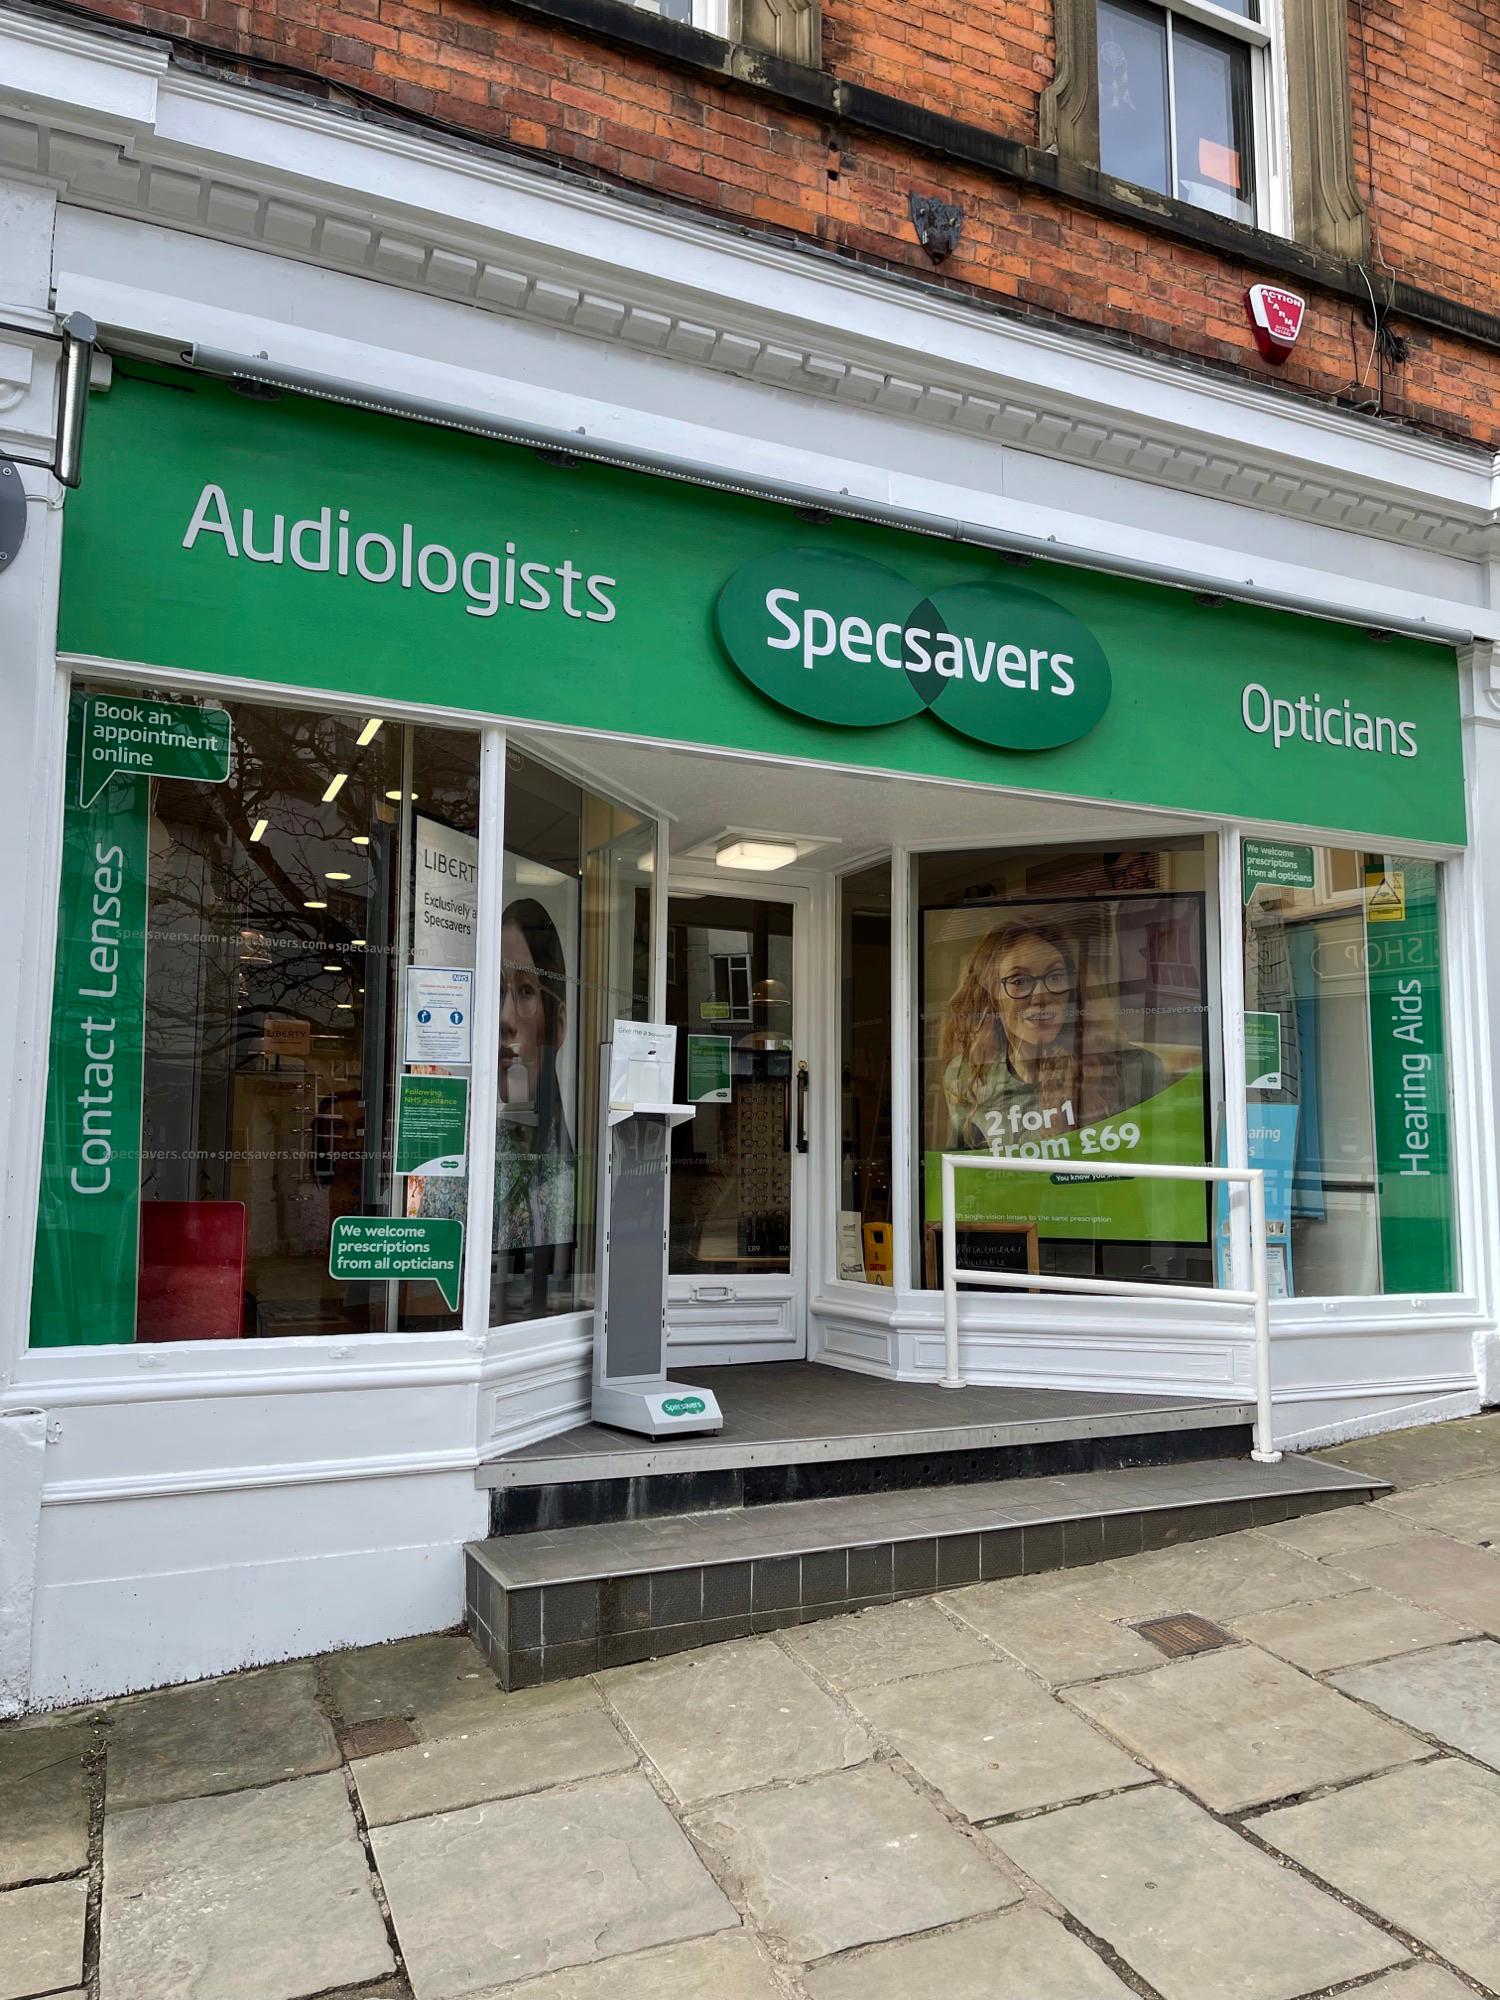 Specsavers Ashbourne Specsavers Opticians and Audiologists - Ashbourne Derby Ashbourne 01335 348538